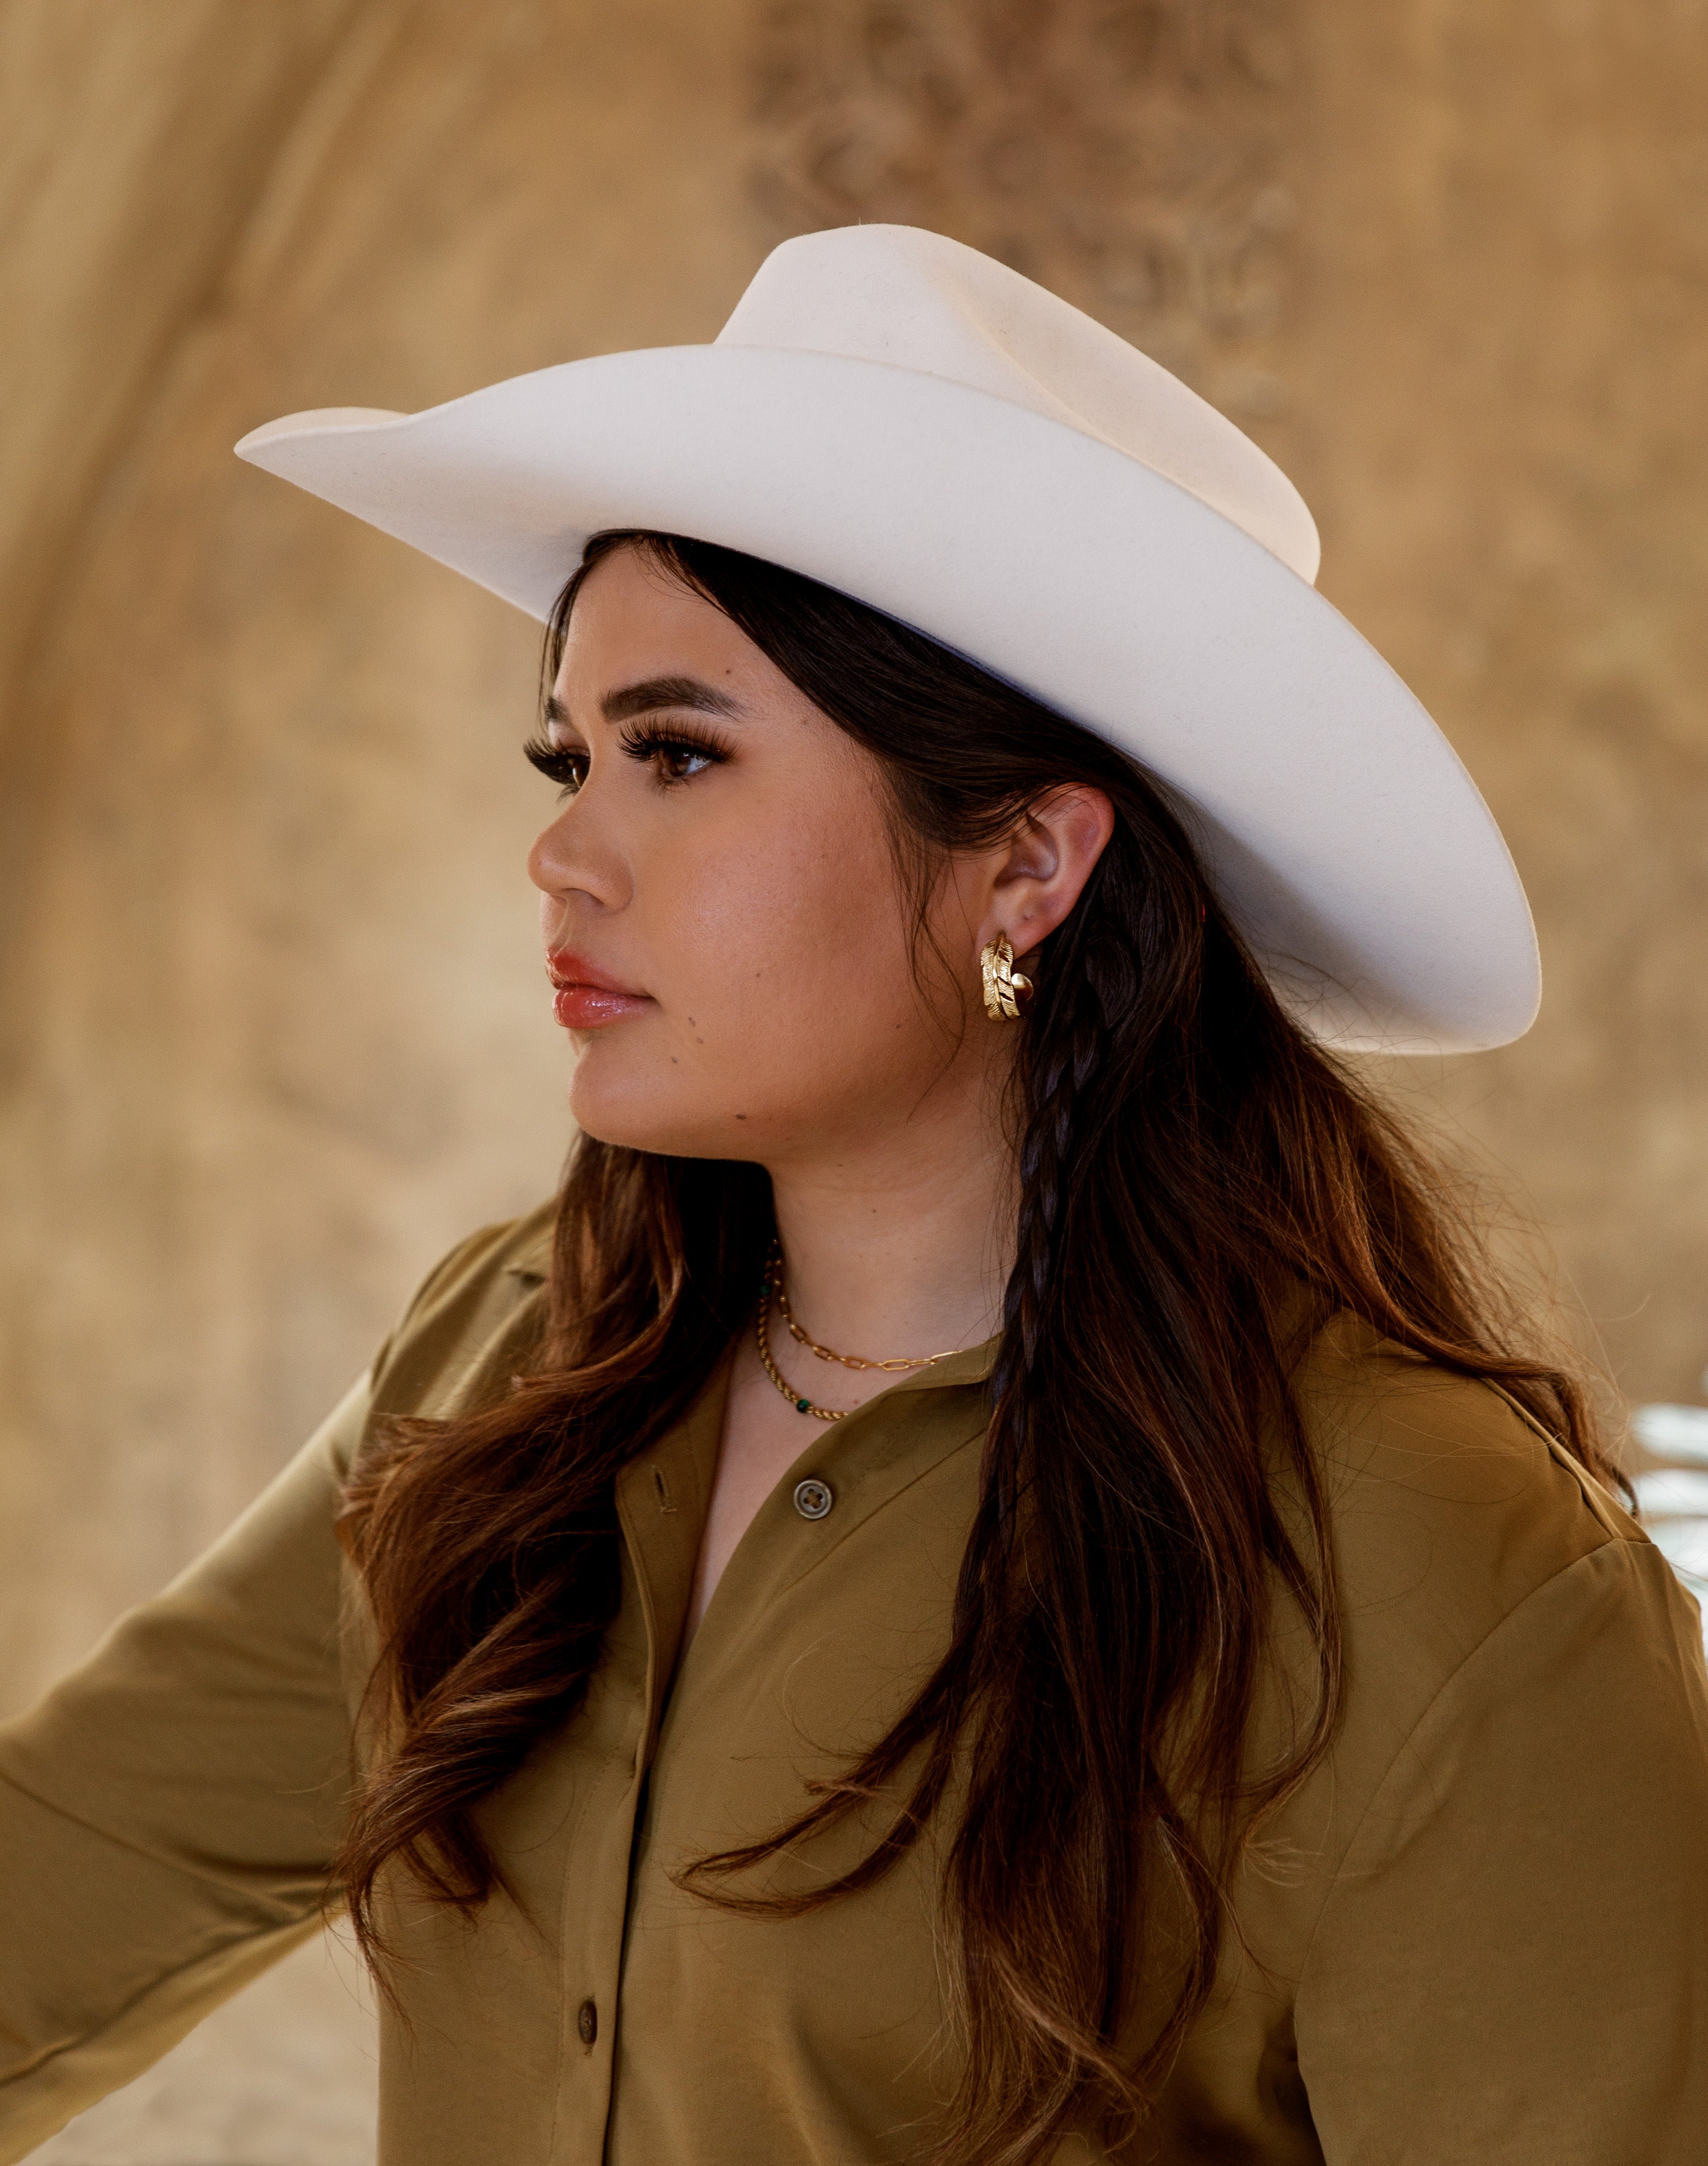 Modern Latina wearing gold hoop earrings and gold chain dainty necklace inspired by the Latino and Hispanic culture and traditions. Wearing green satin shirt to represent her cactus roots and white cowboy hat for her culture and Latina aesthetic